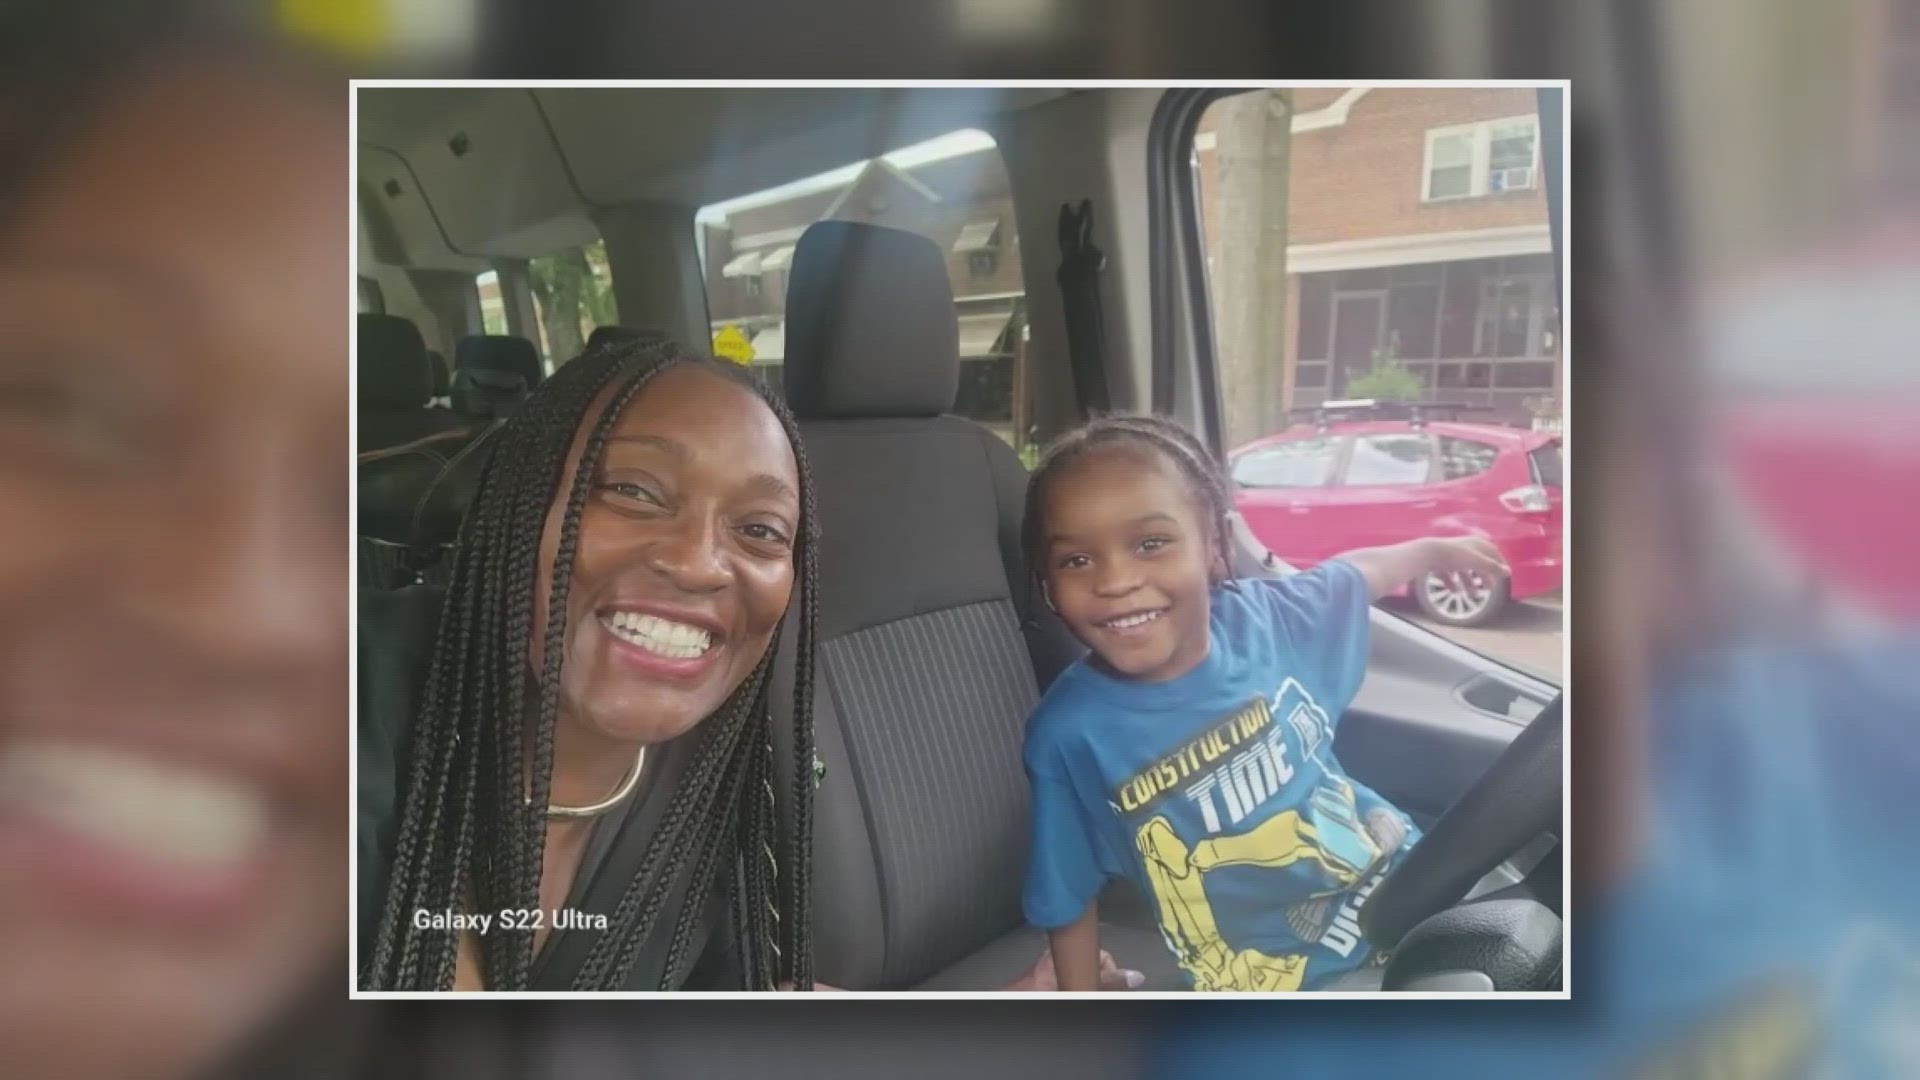 The family of the Prince George's County mother and son rescued from a fiery crash on I-495 say both are in stable condition.